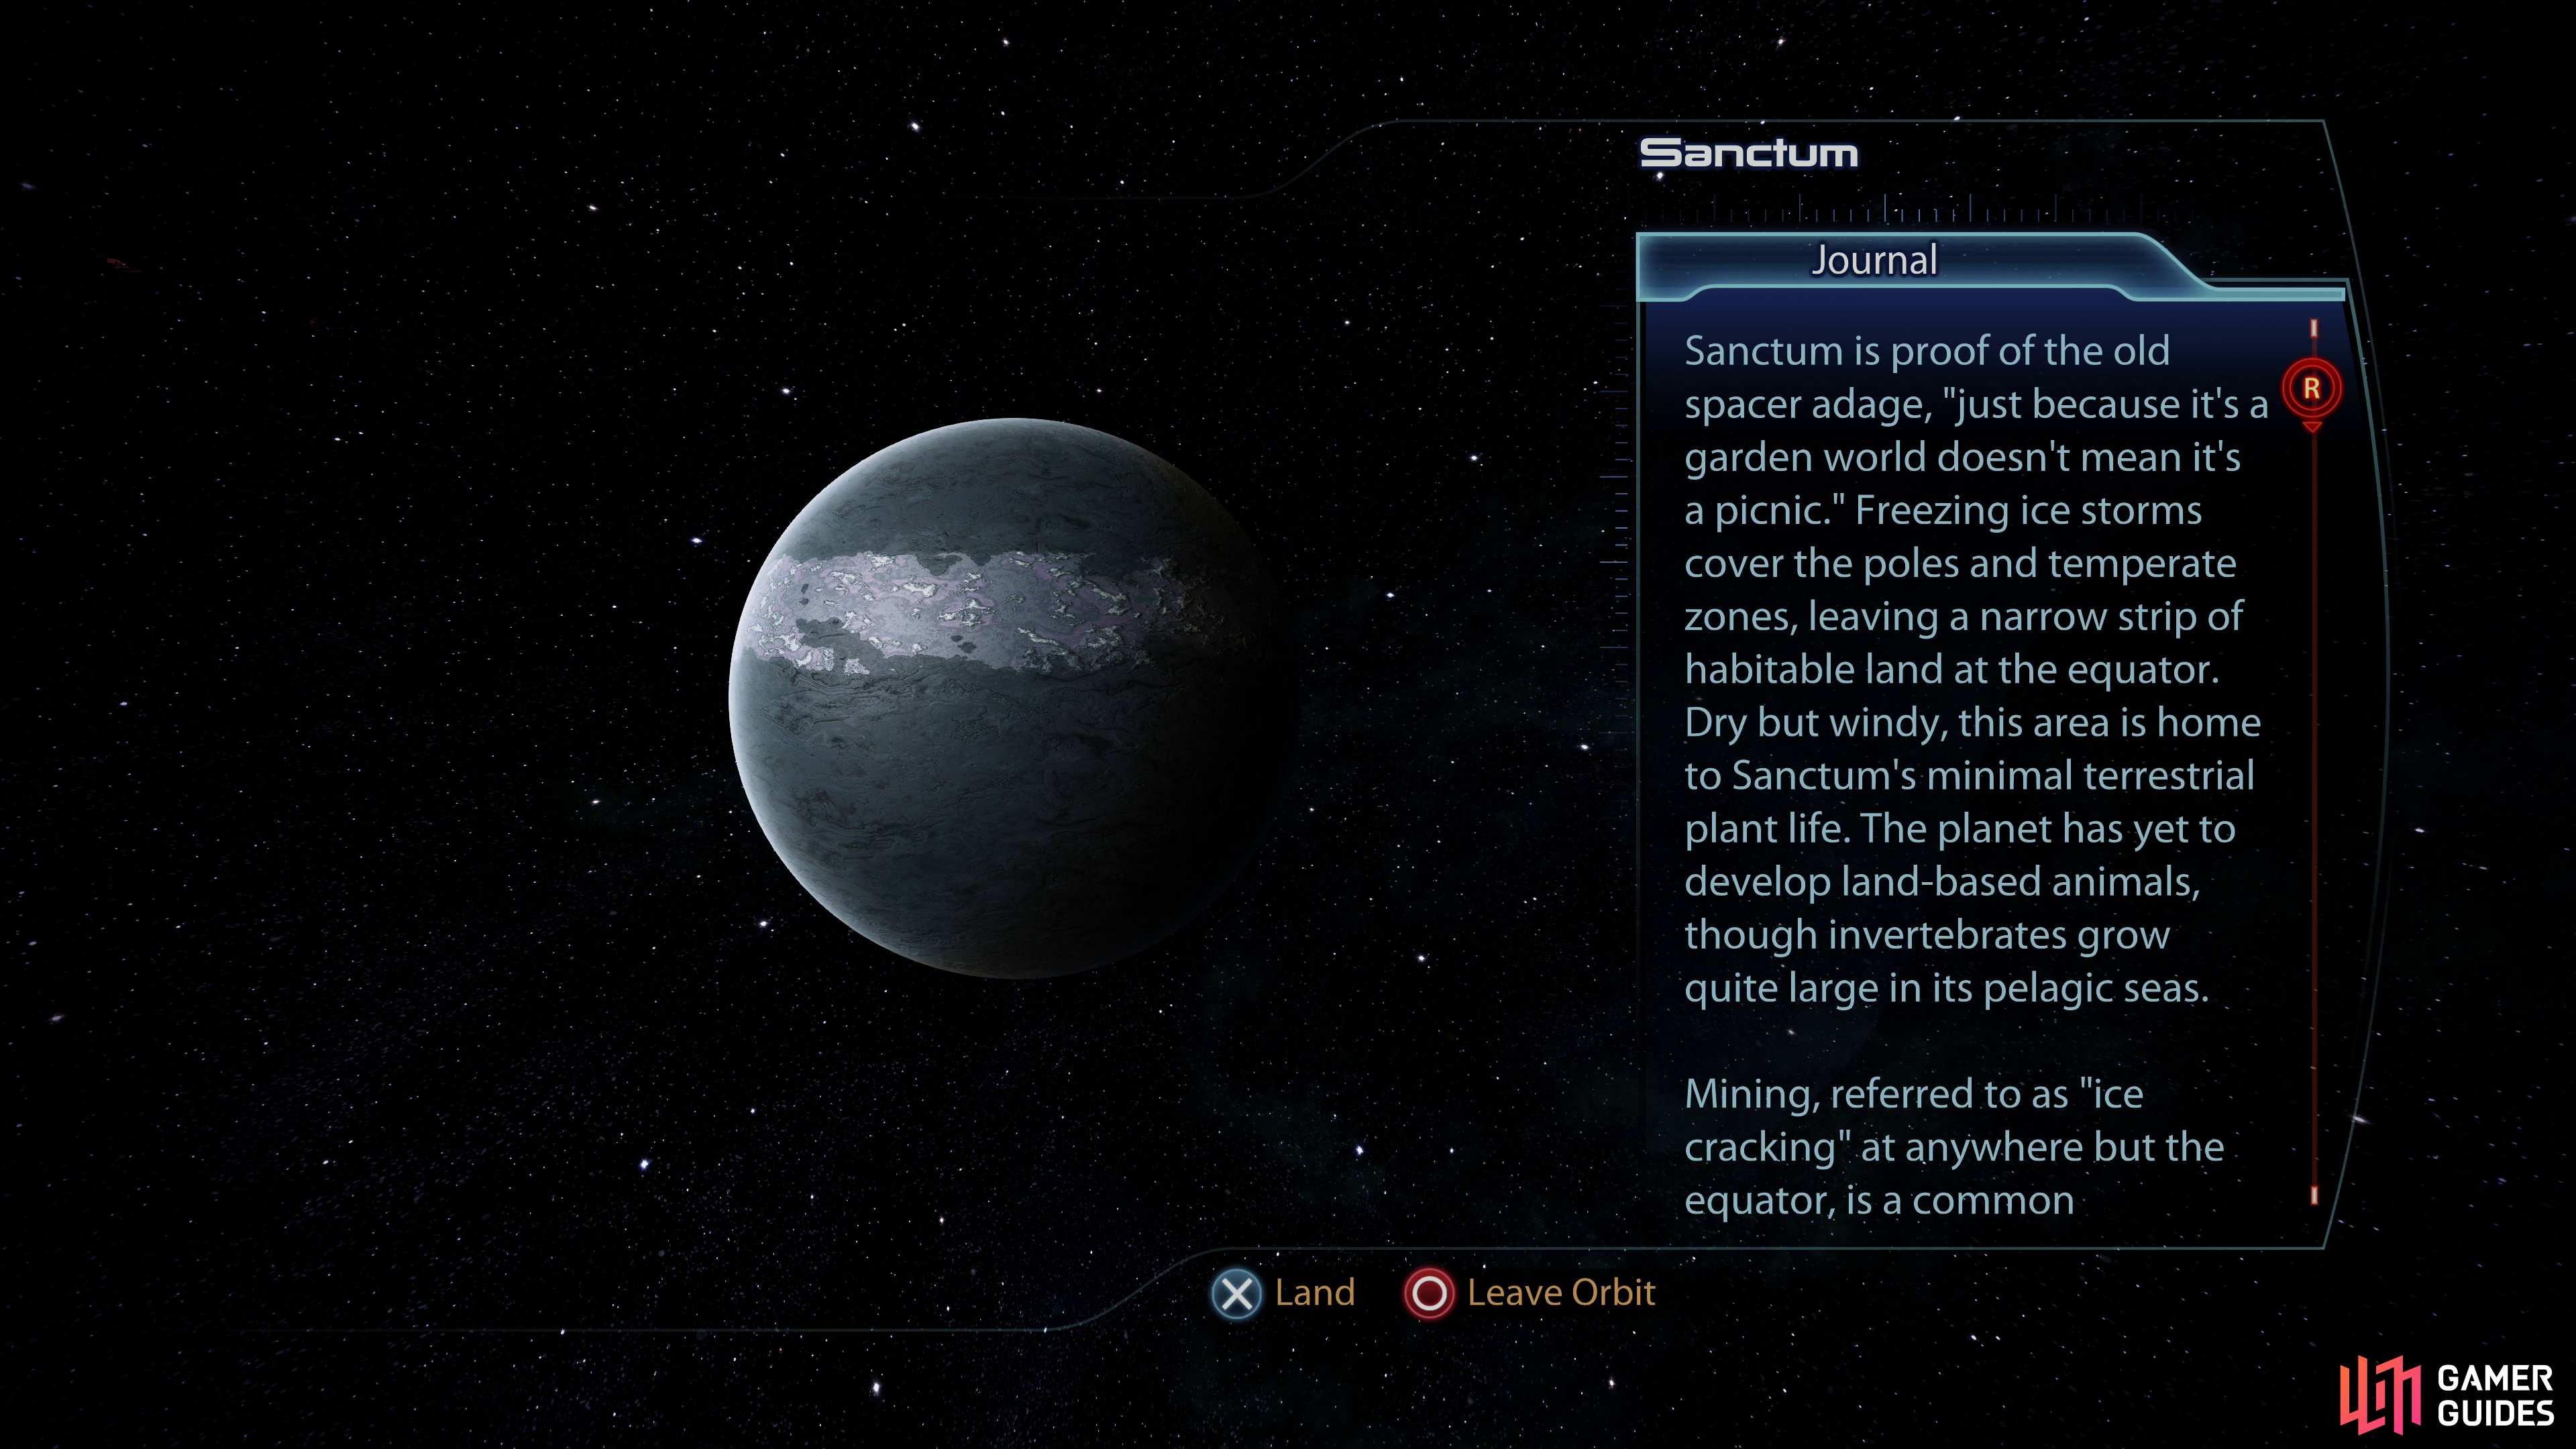 The mission “N7: Cerberus Lab” can be started by traveling to the planet Sanctum.